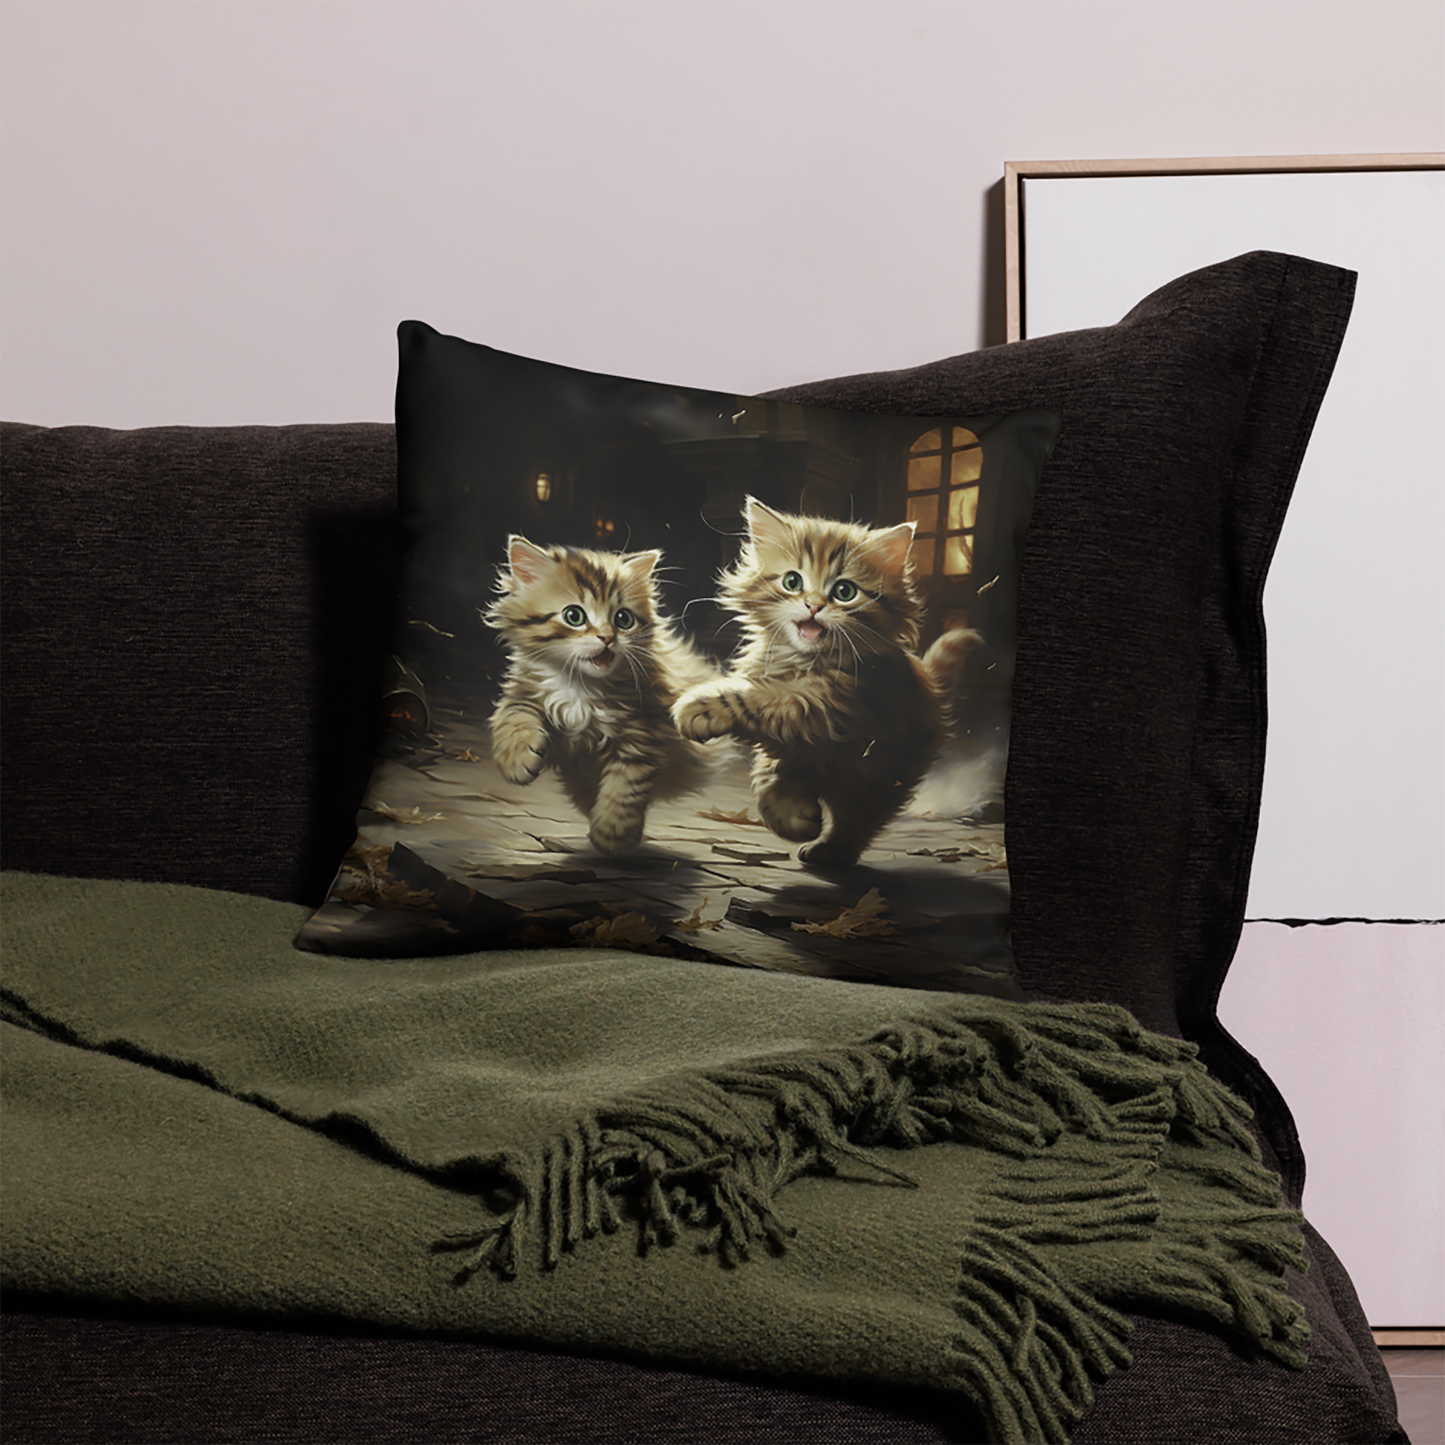 Cat Throw Pillow Stormy Frolic Fairytale Kittens Polyester Decorative Cushion 18x18